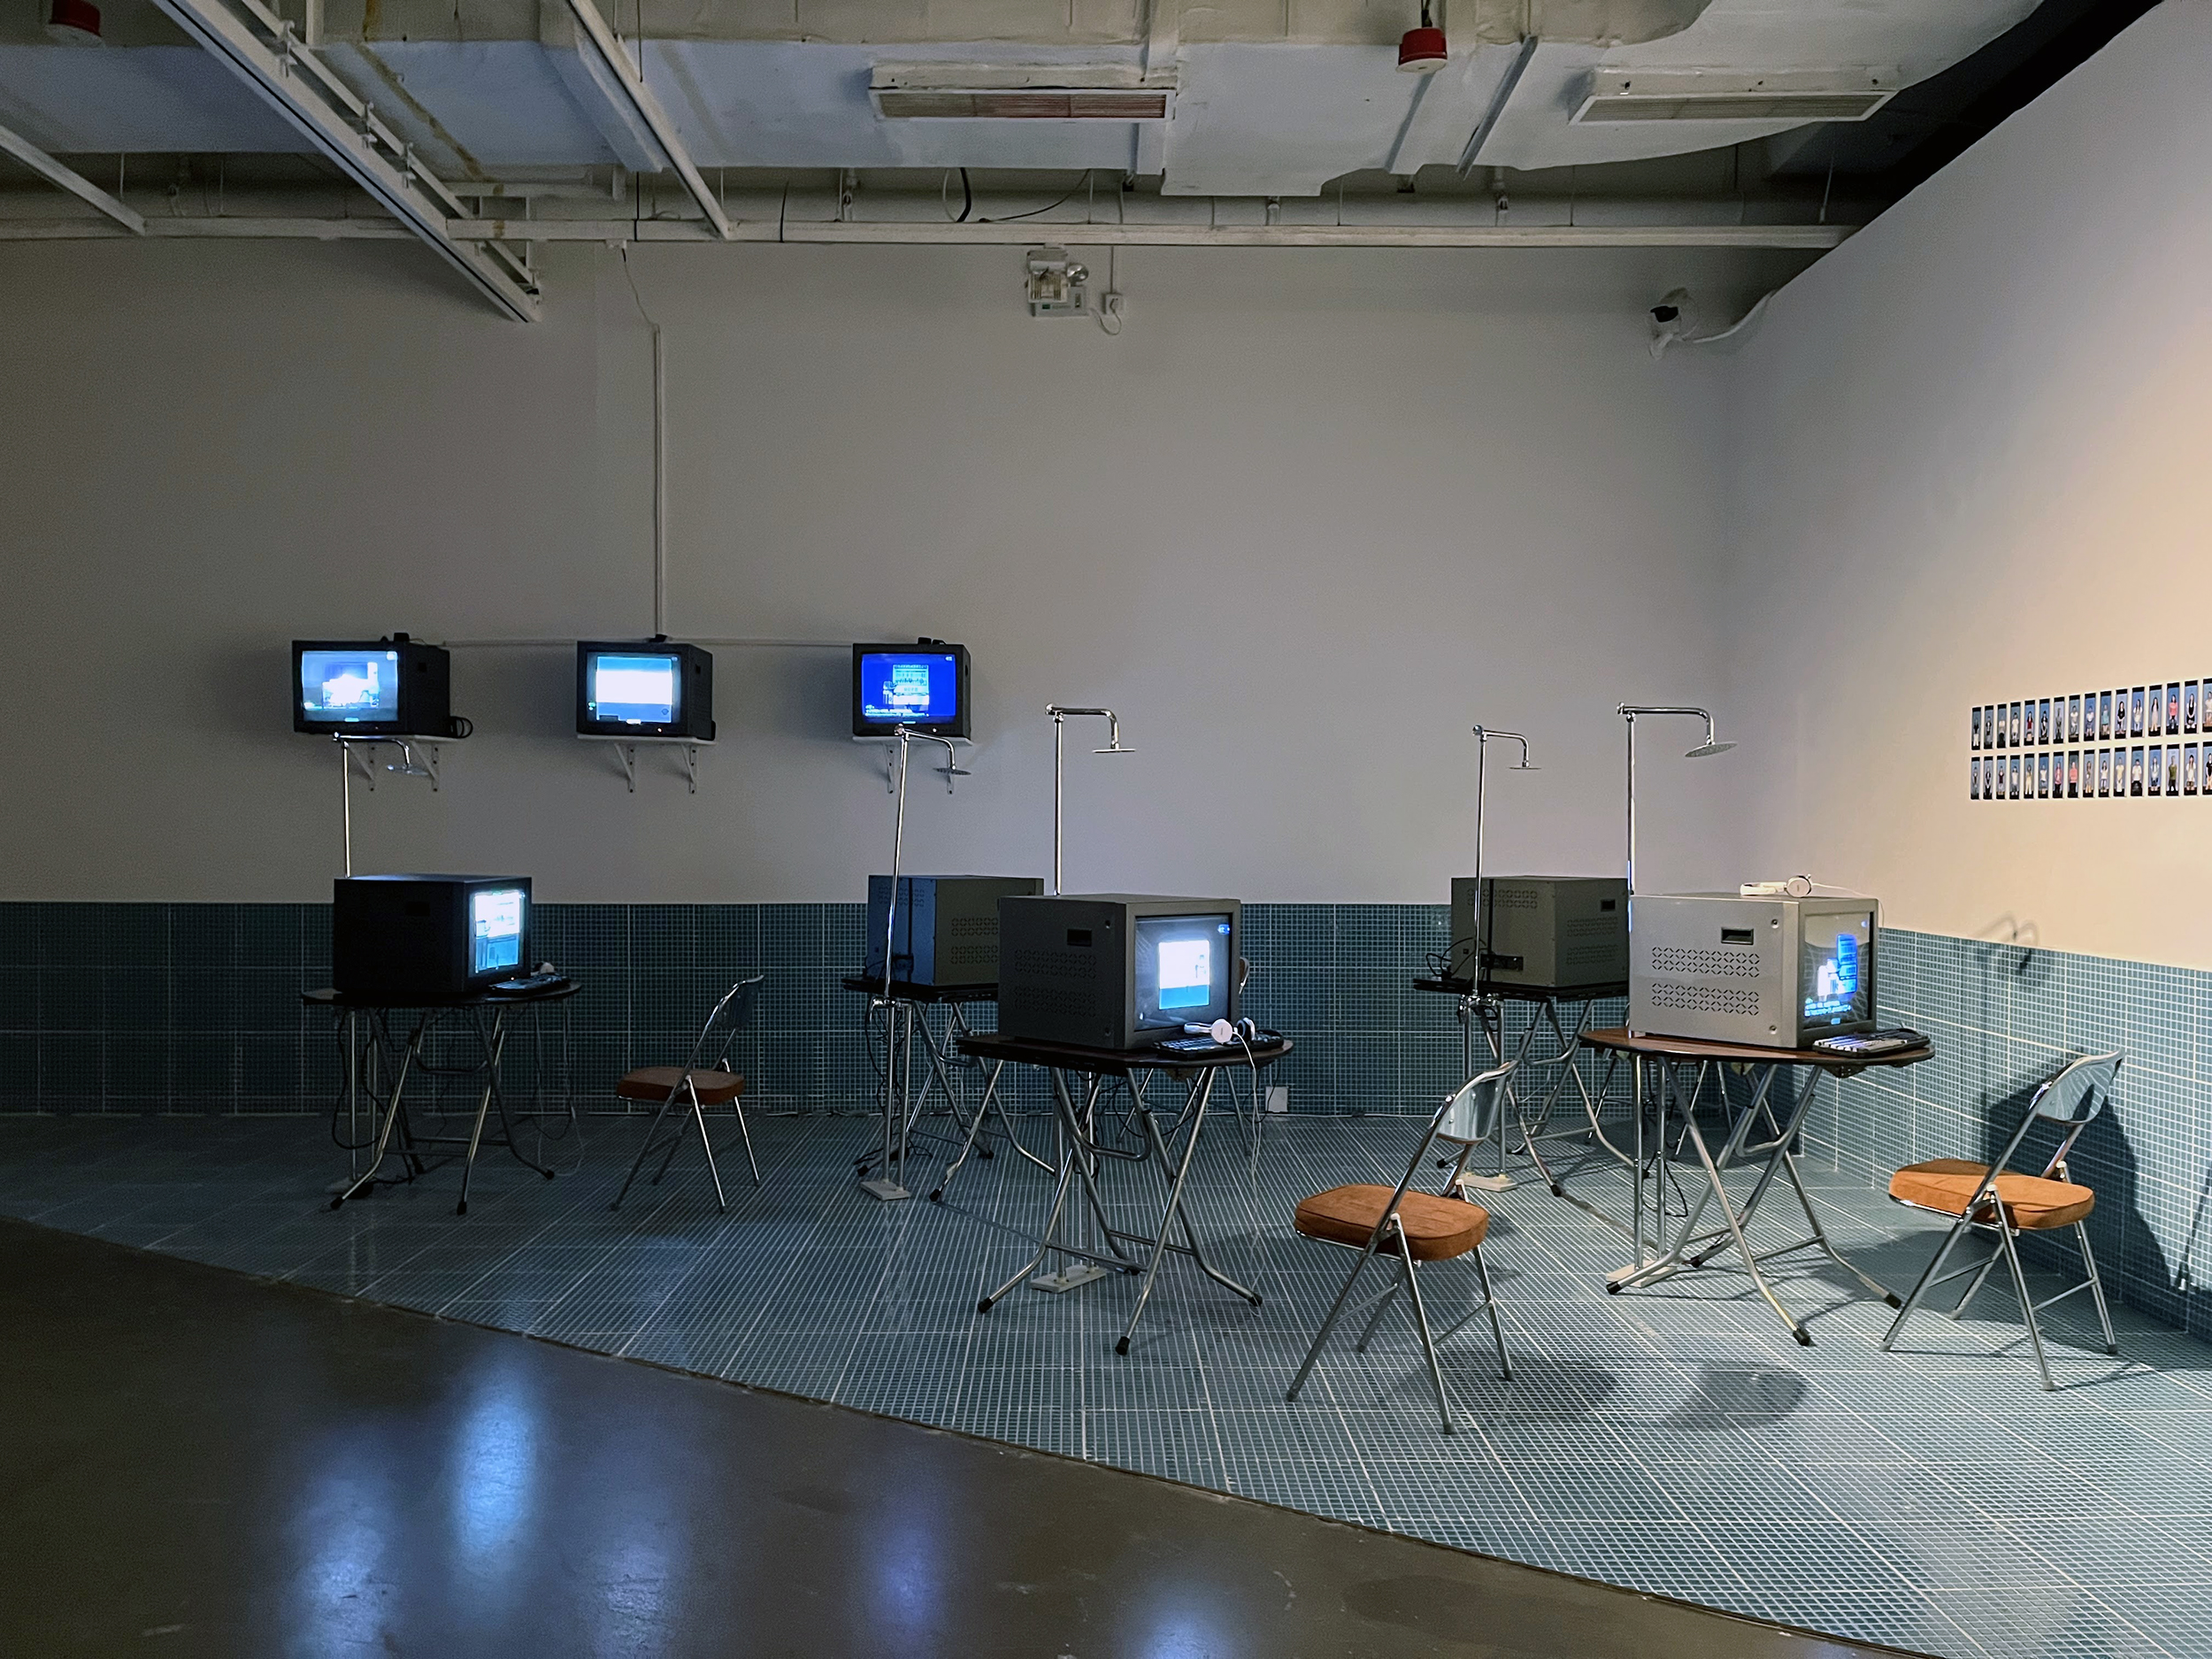 installation view at Today Art Museum, Beijing